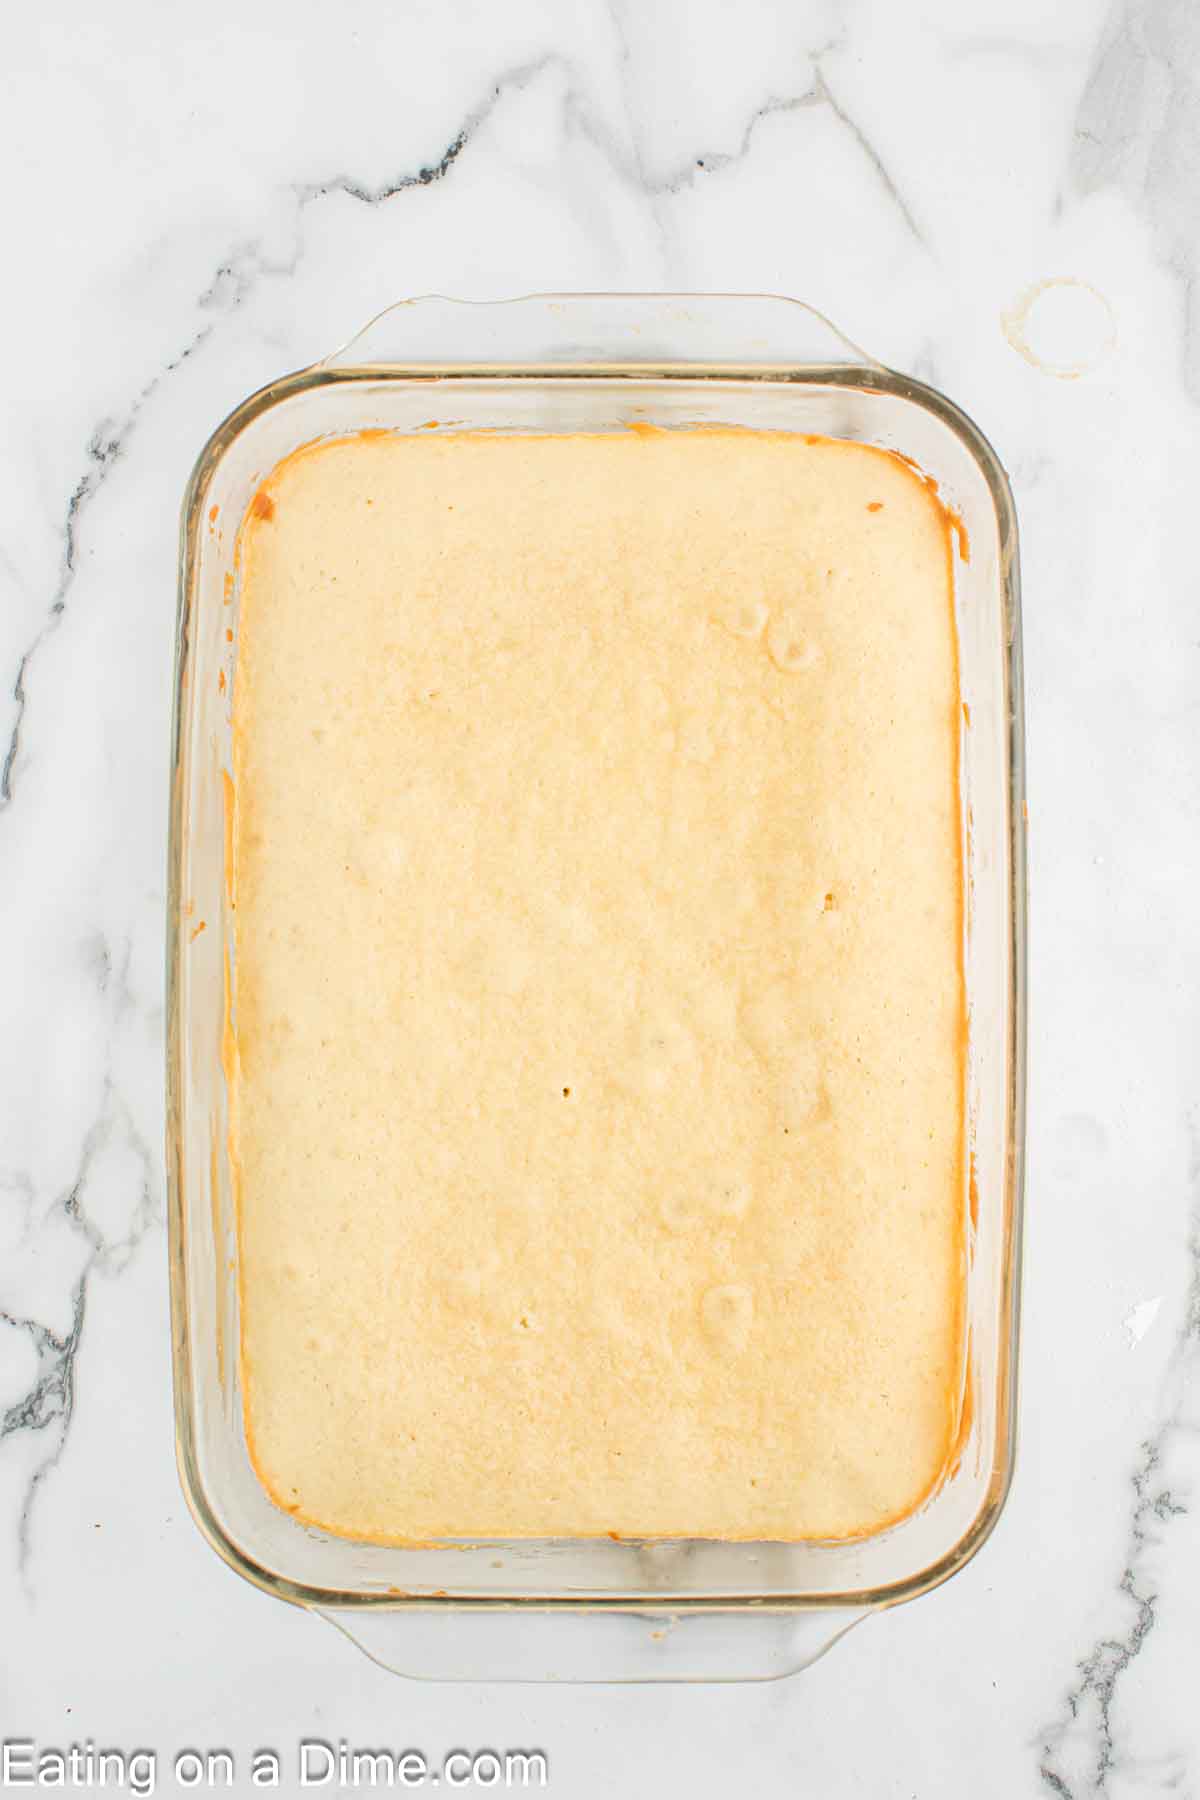 Baked cake in a baking dish